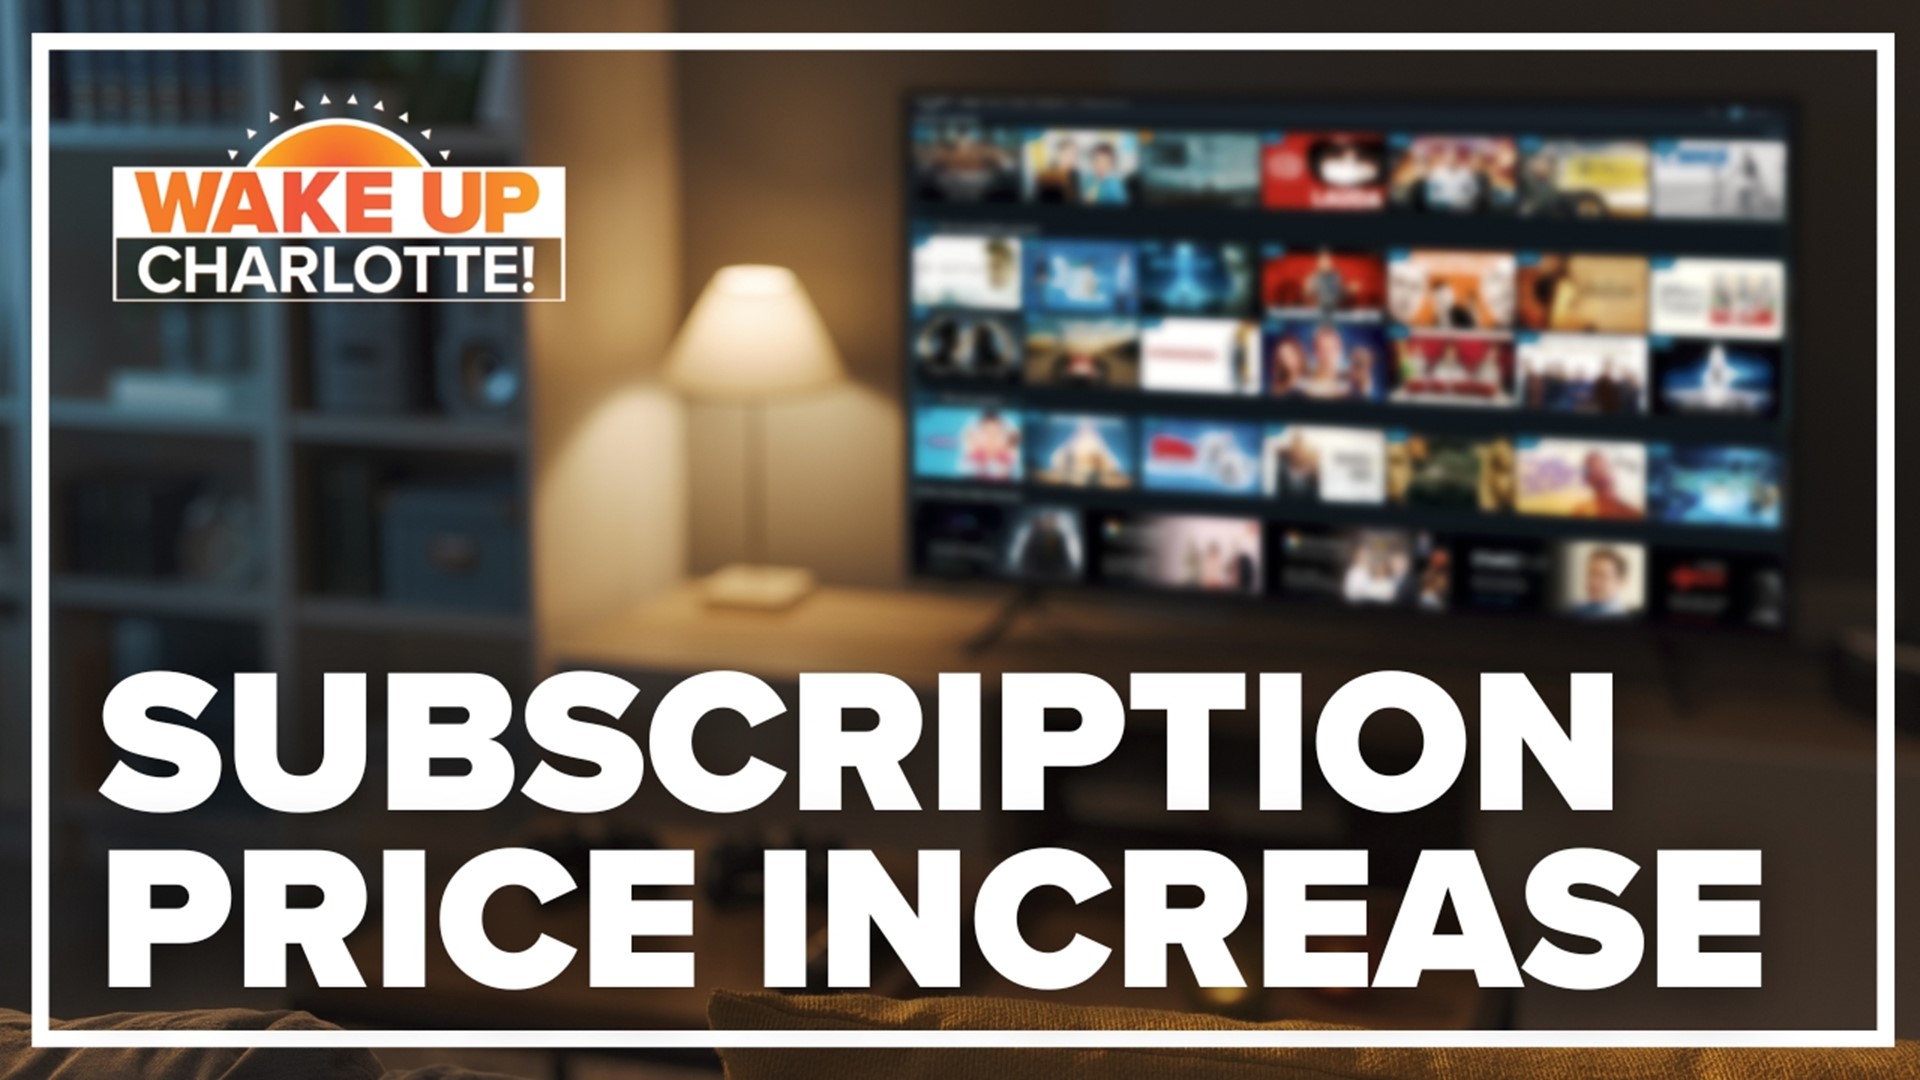 Prices to subscriptions services are rising.